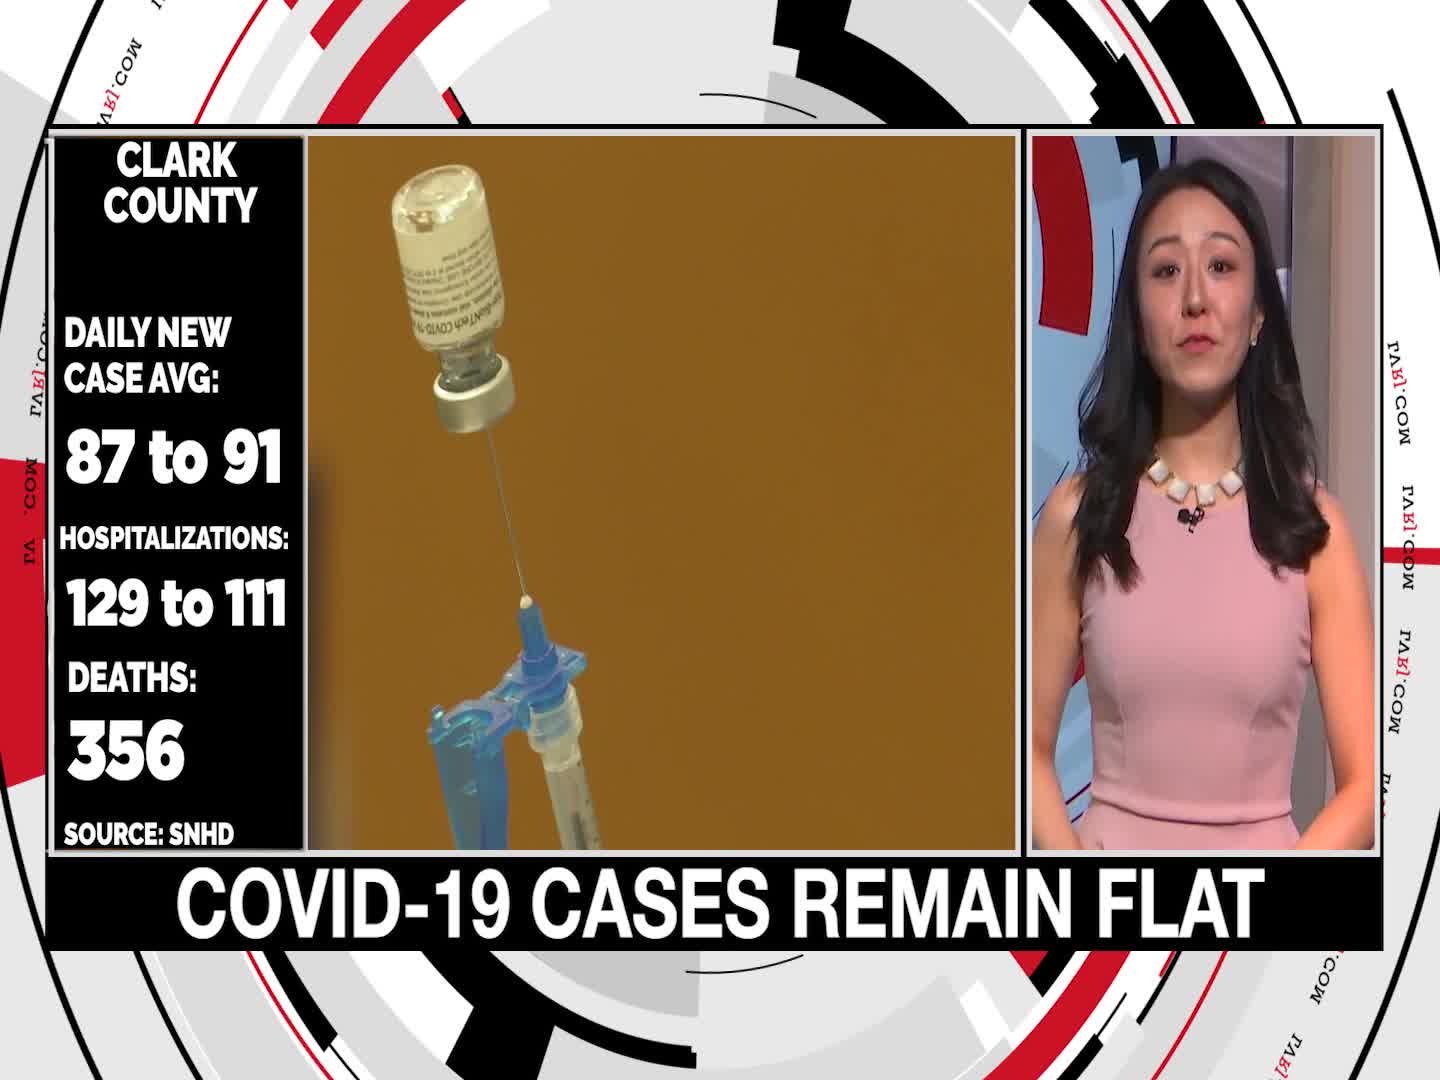 Covid-19 Cases Remain Flat